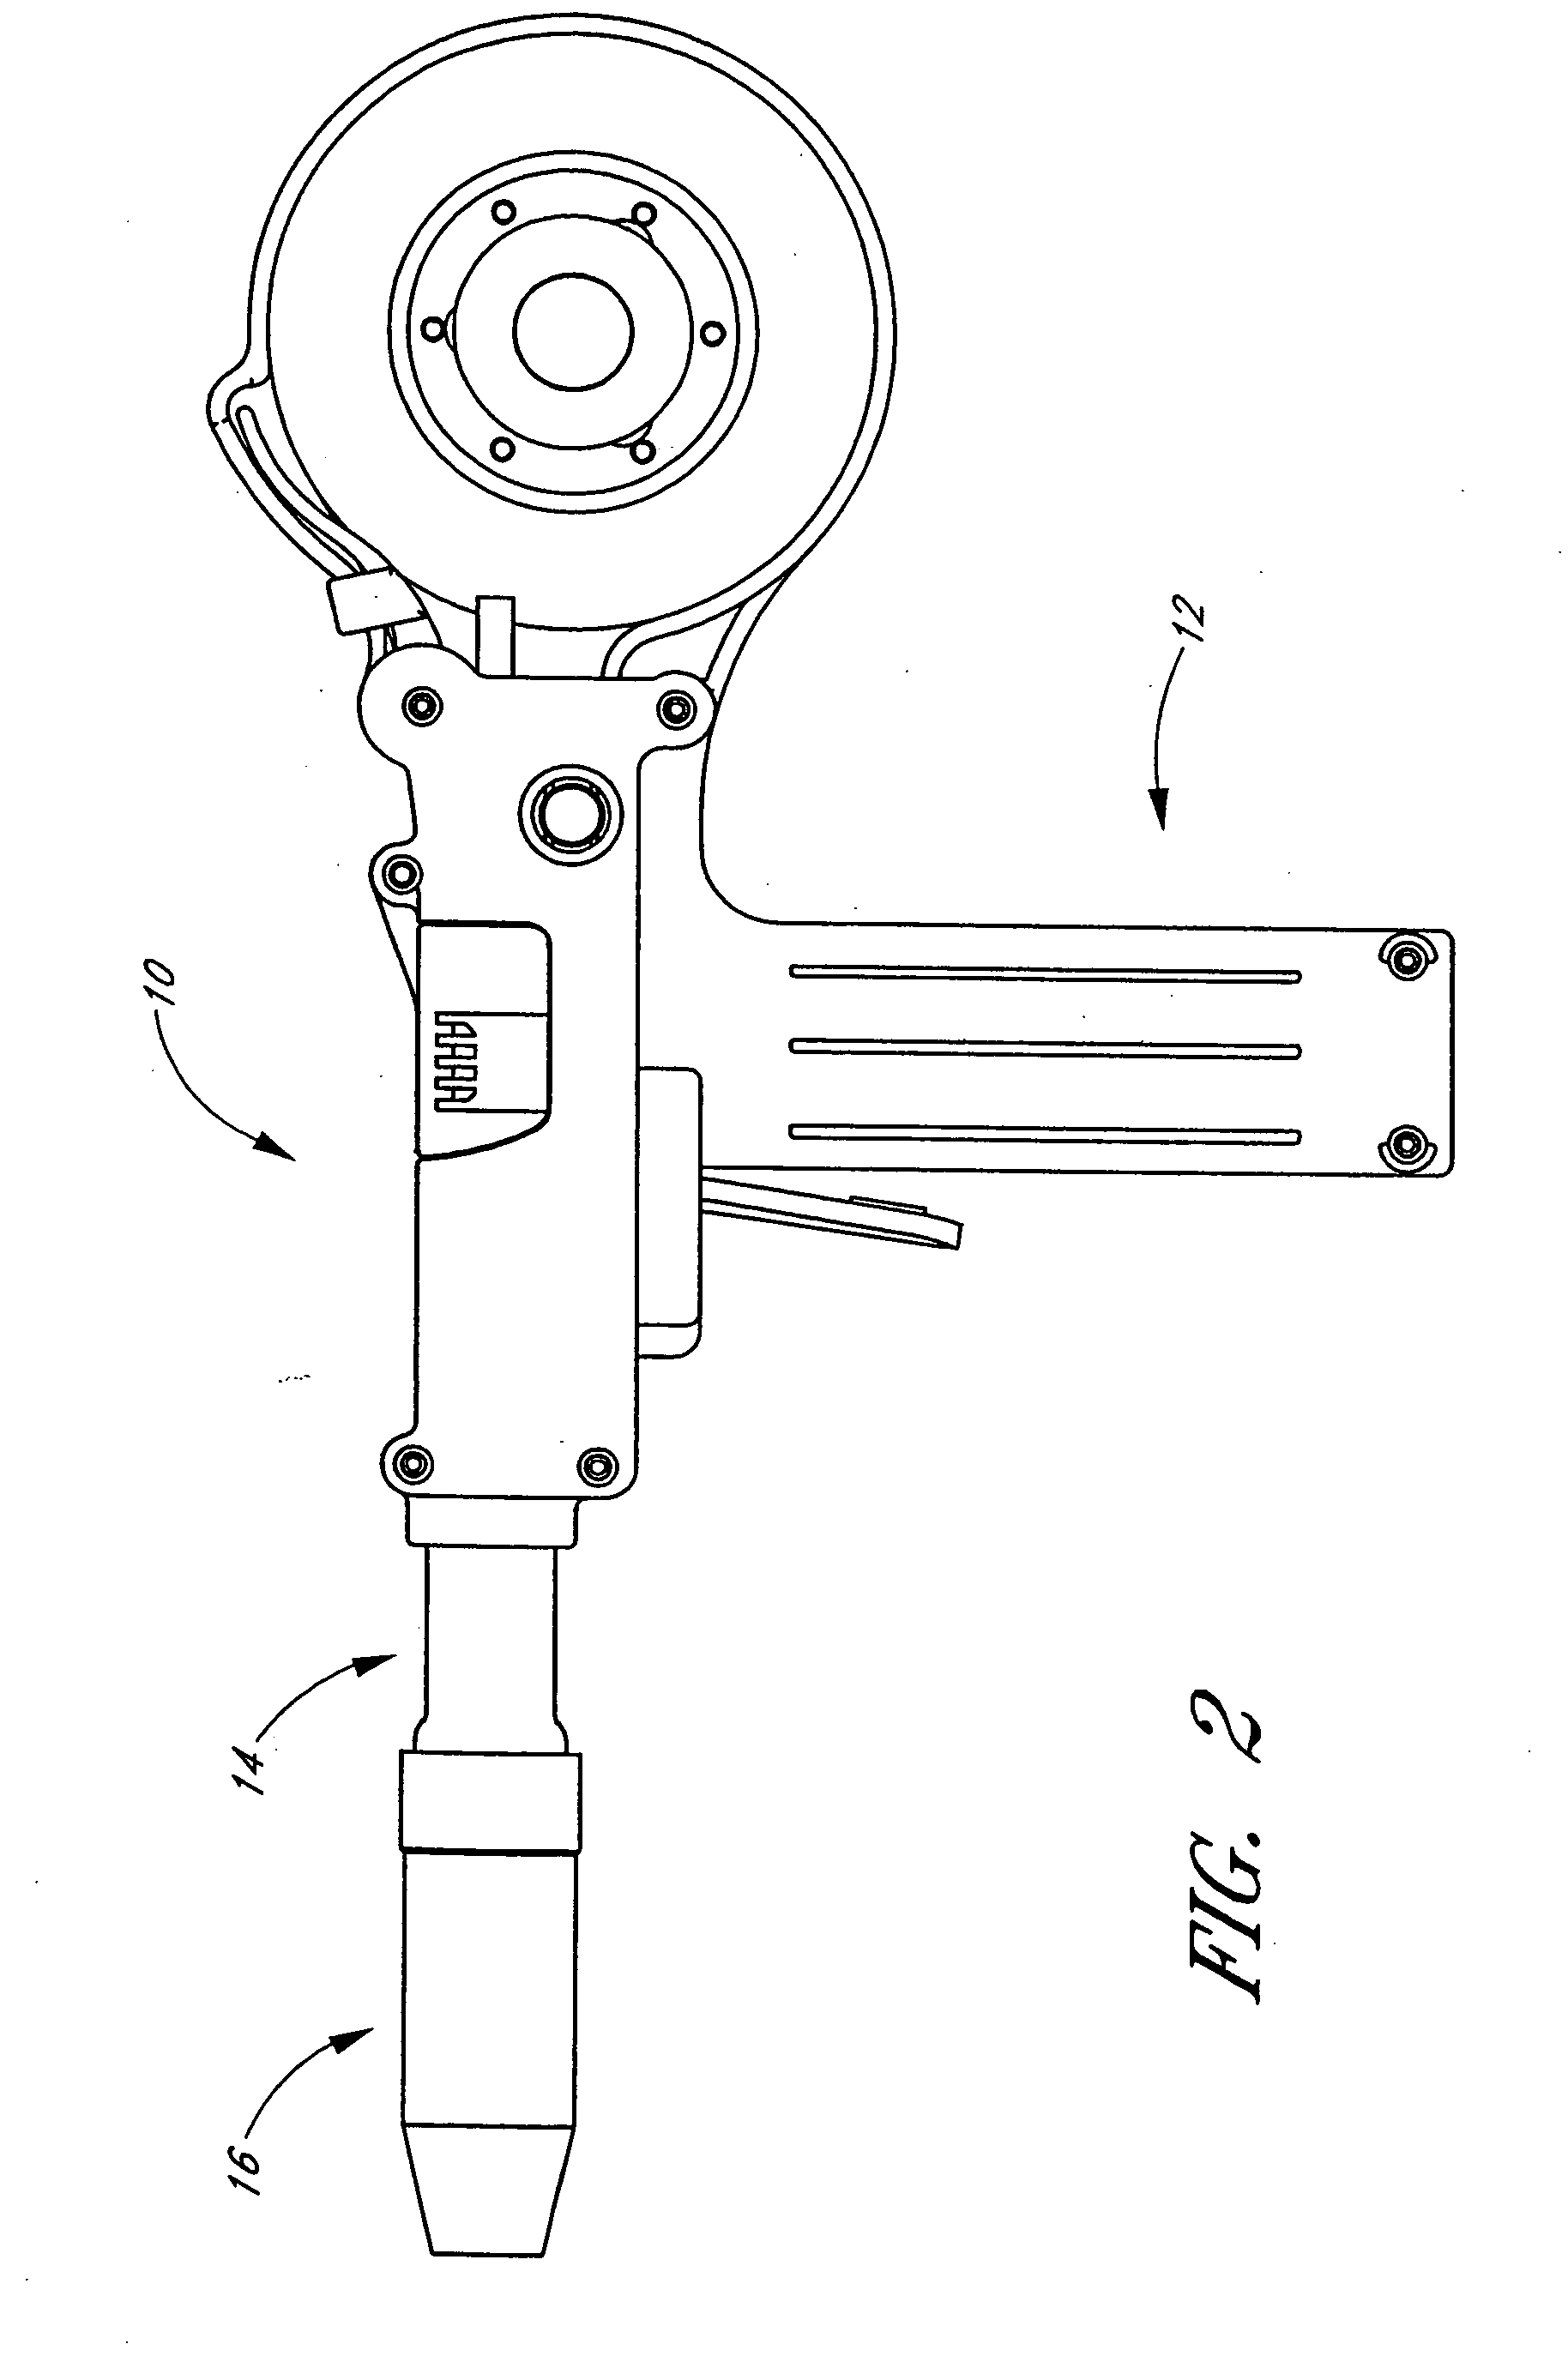 Spindle and spool for welding gun